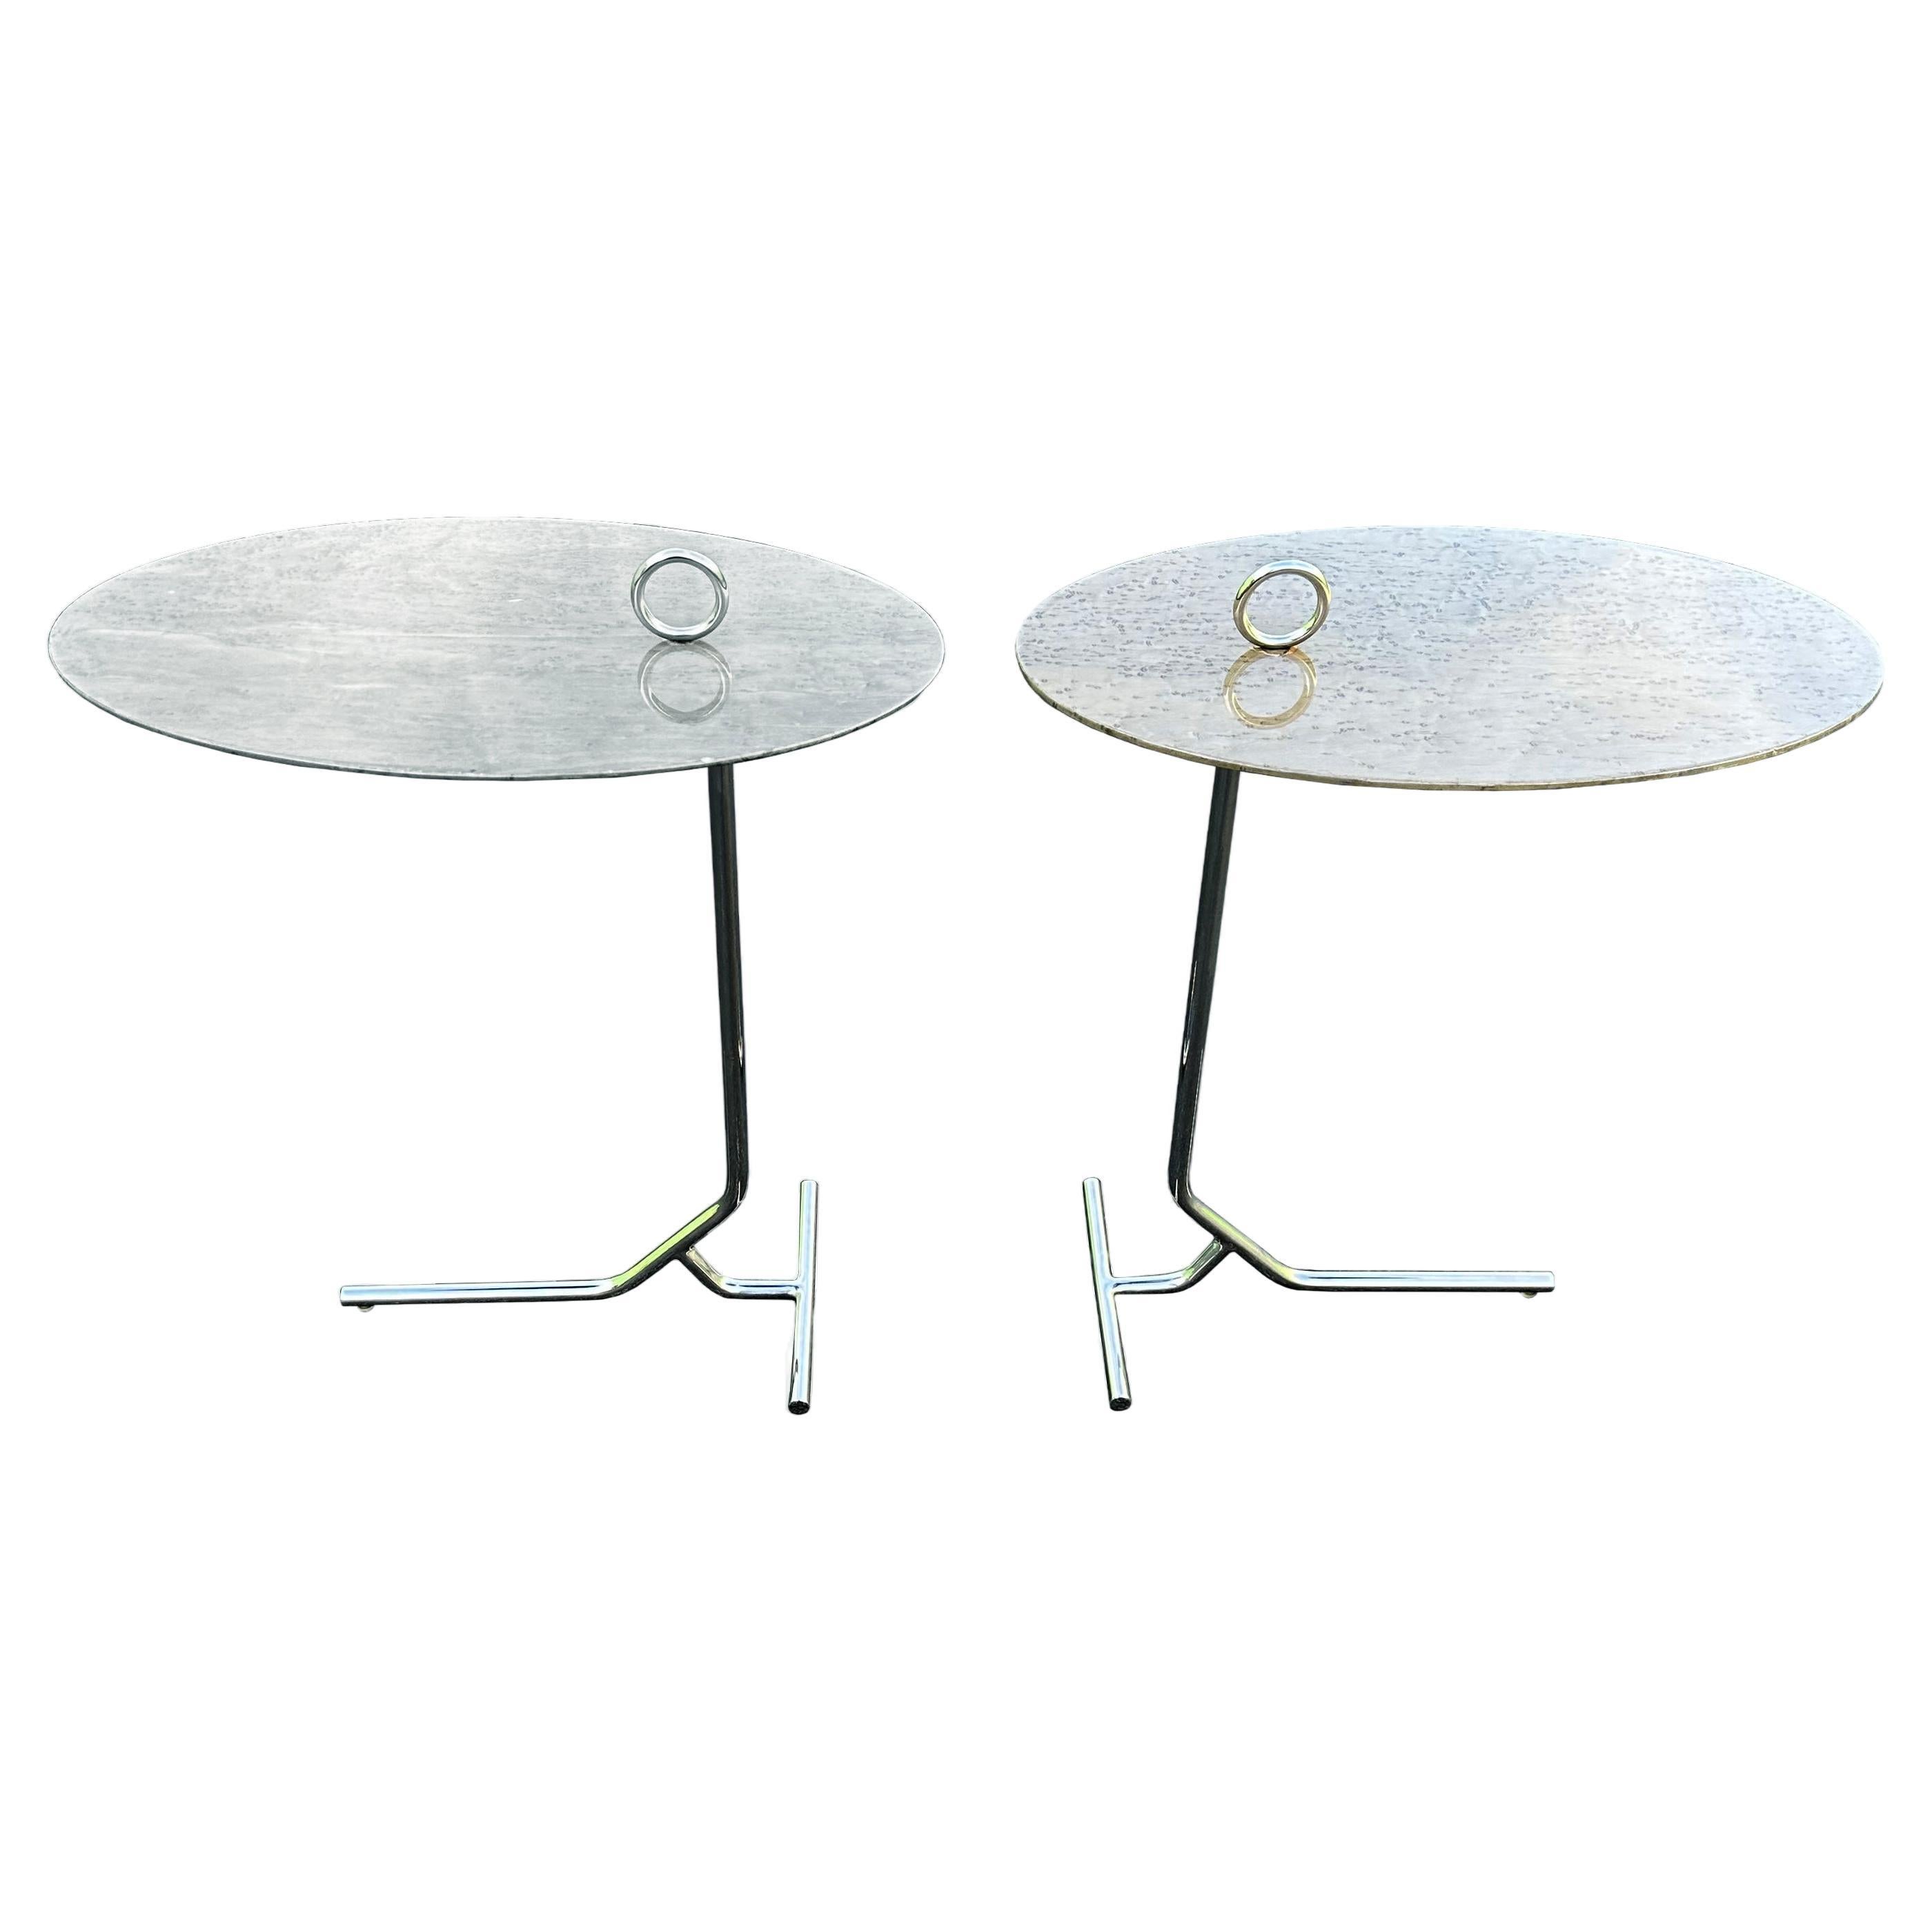 Post-Modern Cantilever Side Tables by Interlude Home, Pair